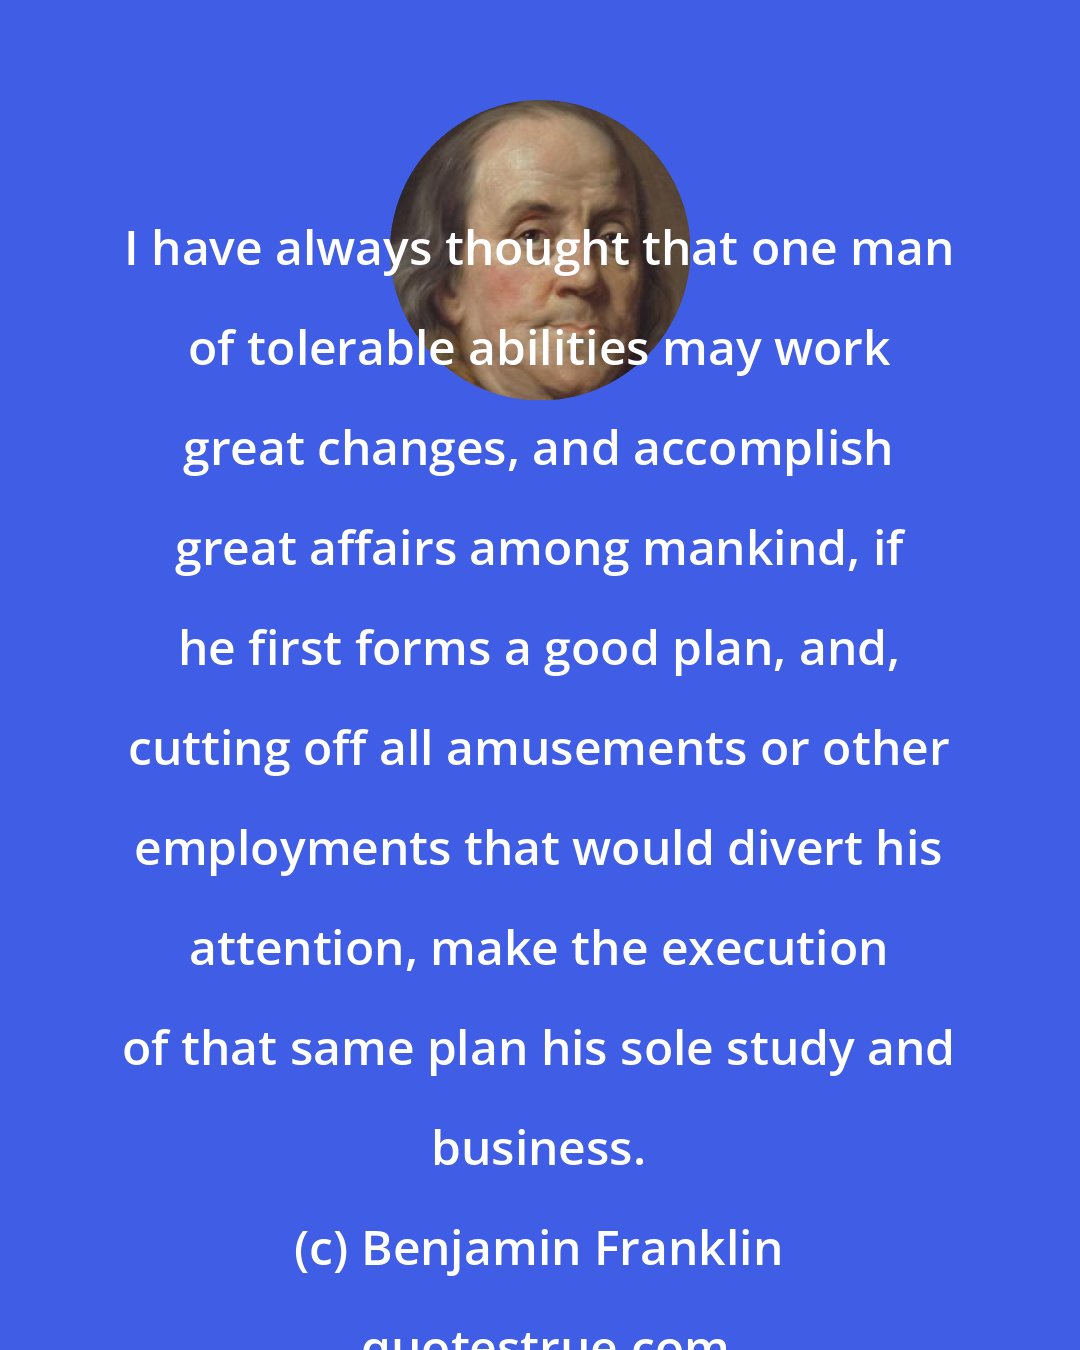 Benjamin Franklin: I have always thought that one man of tolerable abilities may work great changes, and accomplish great affairs among mankind, if he first forms a good plan, and, cutting off all amusements or other employments that would divert his attention, make the execution of that same plan his sole study and business.